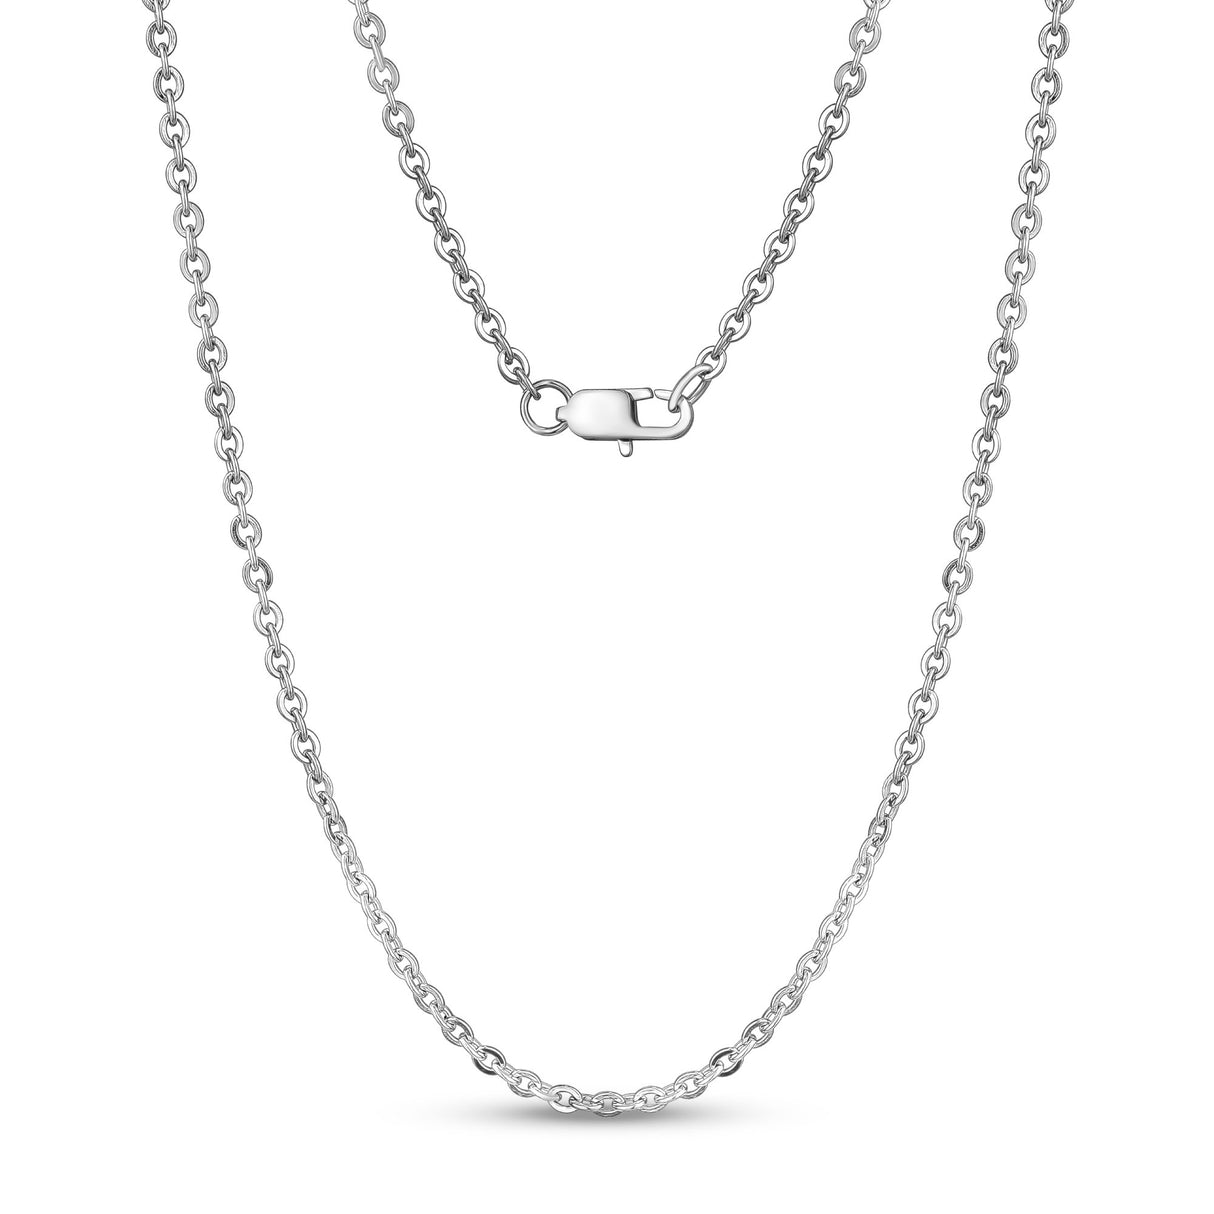 Unisex Kettingen - 3mm Flat Anchor Oval Link Steel Chain Necklace